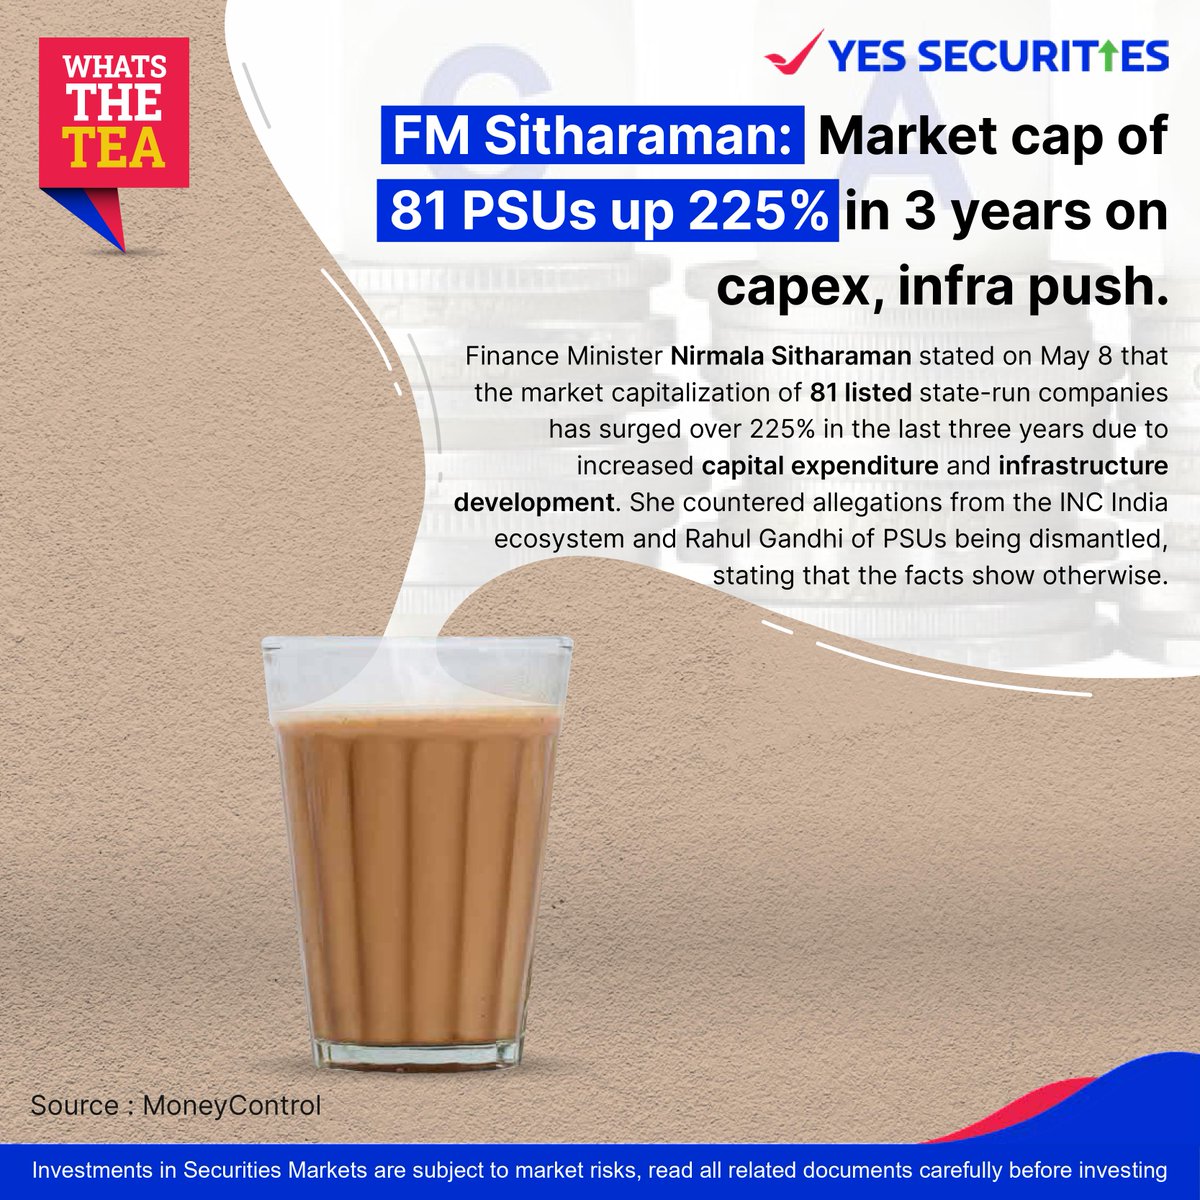 Here's the tea of the week, catch you with some more later.☕

Disclaimer: bit.ly/3yKOHTh

#YESSECURITIES #ChoiceoftheWize #WhatsTheTea #WeeklyNews #News #WeeklyWrap #NewsUpdate